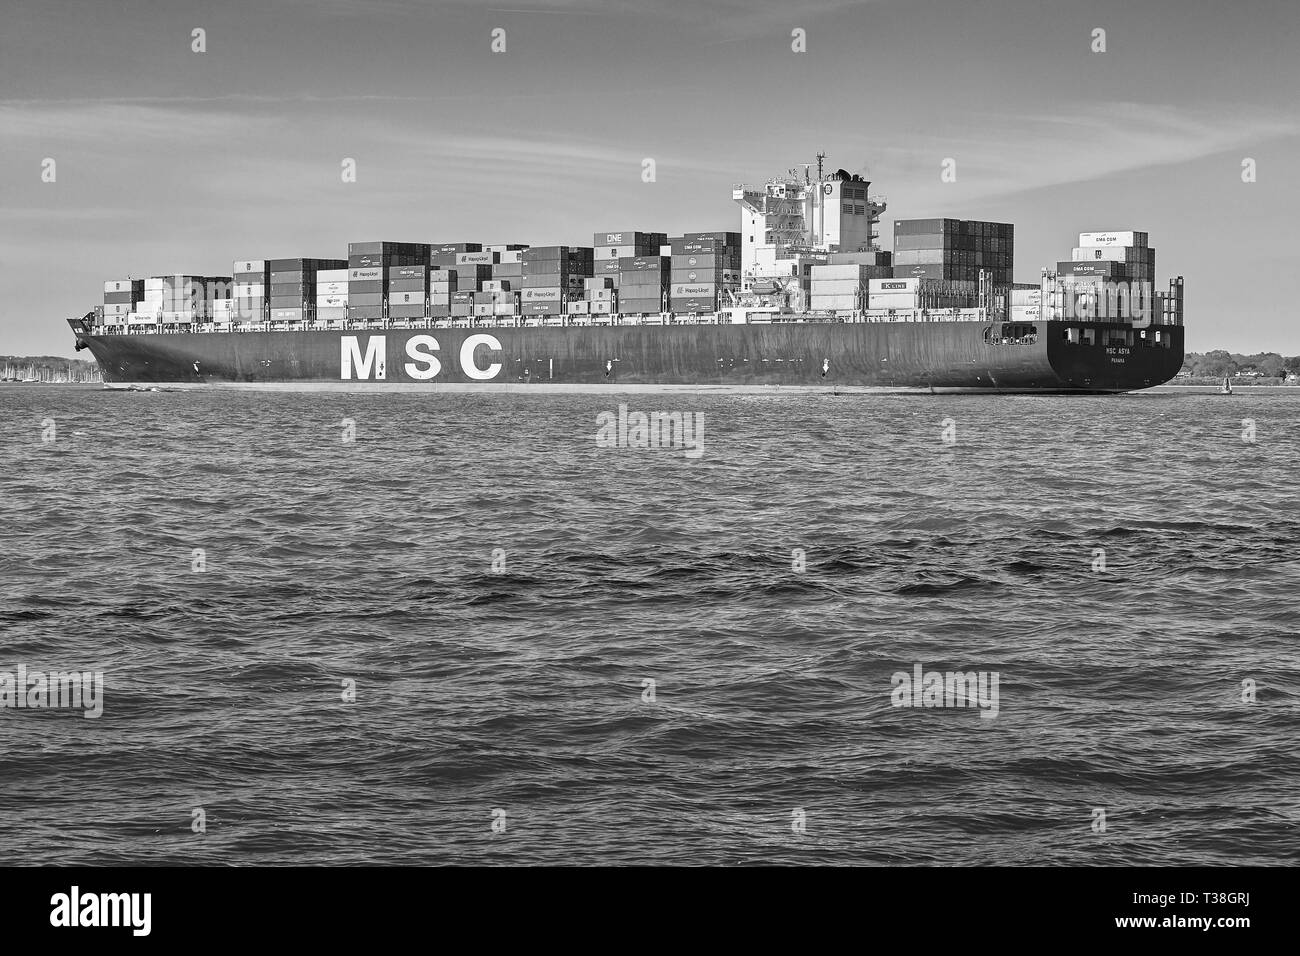 Black and White Photo Of The Container Ship MSC ASYA As She Enters  The Port Of Southampton, UK Stock Photo